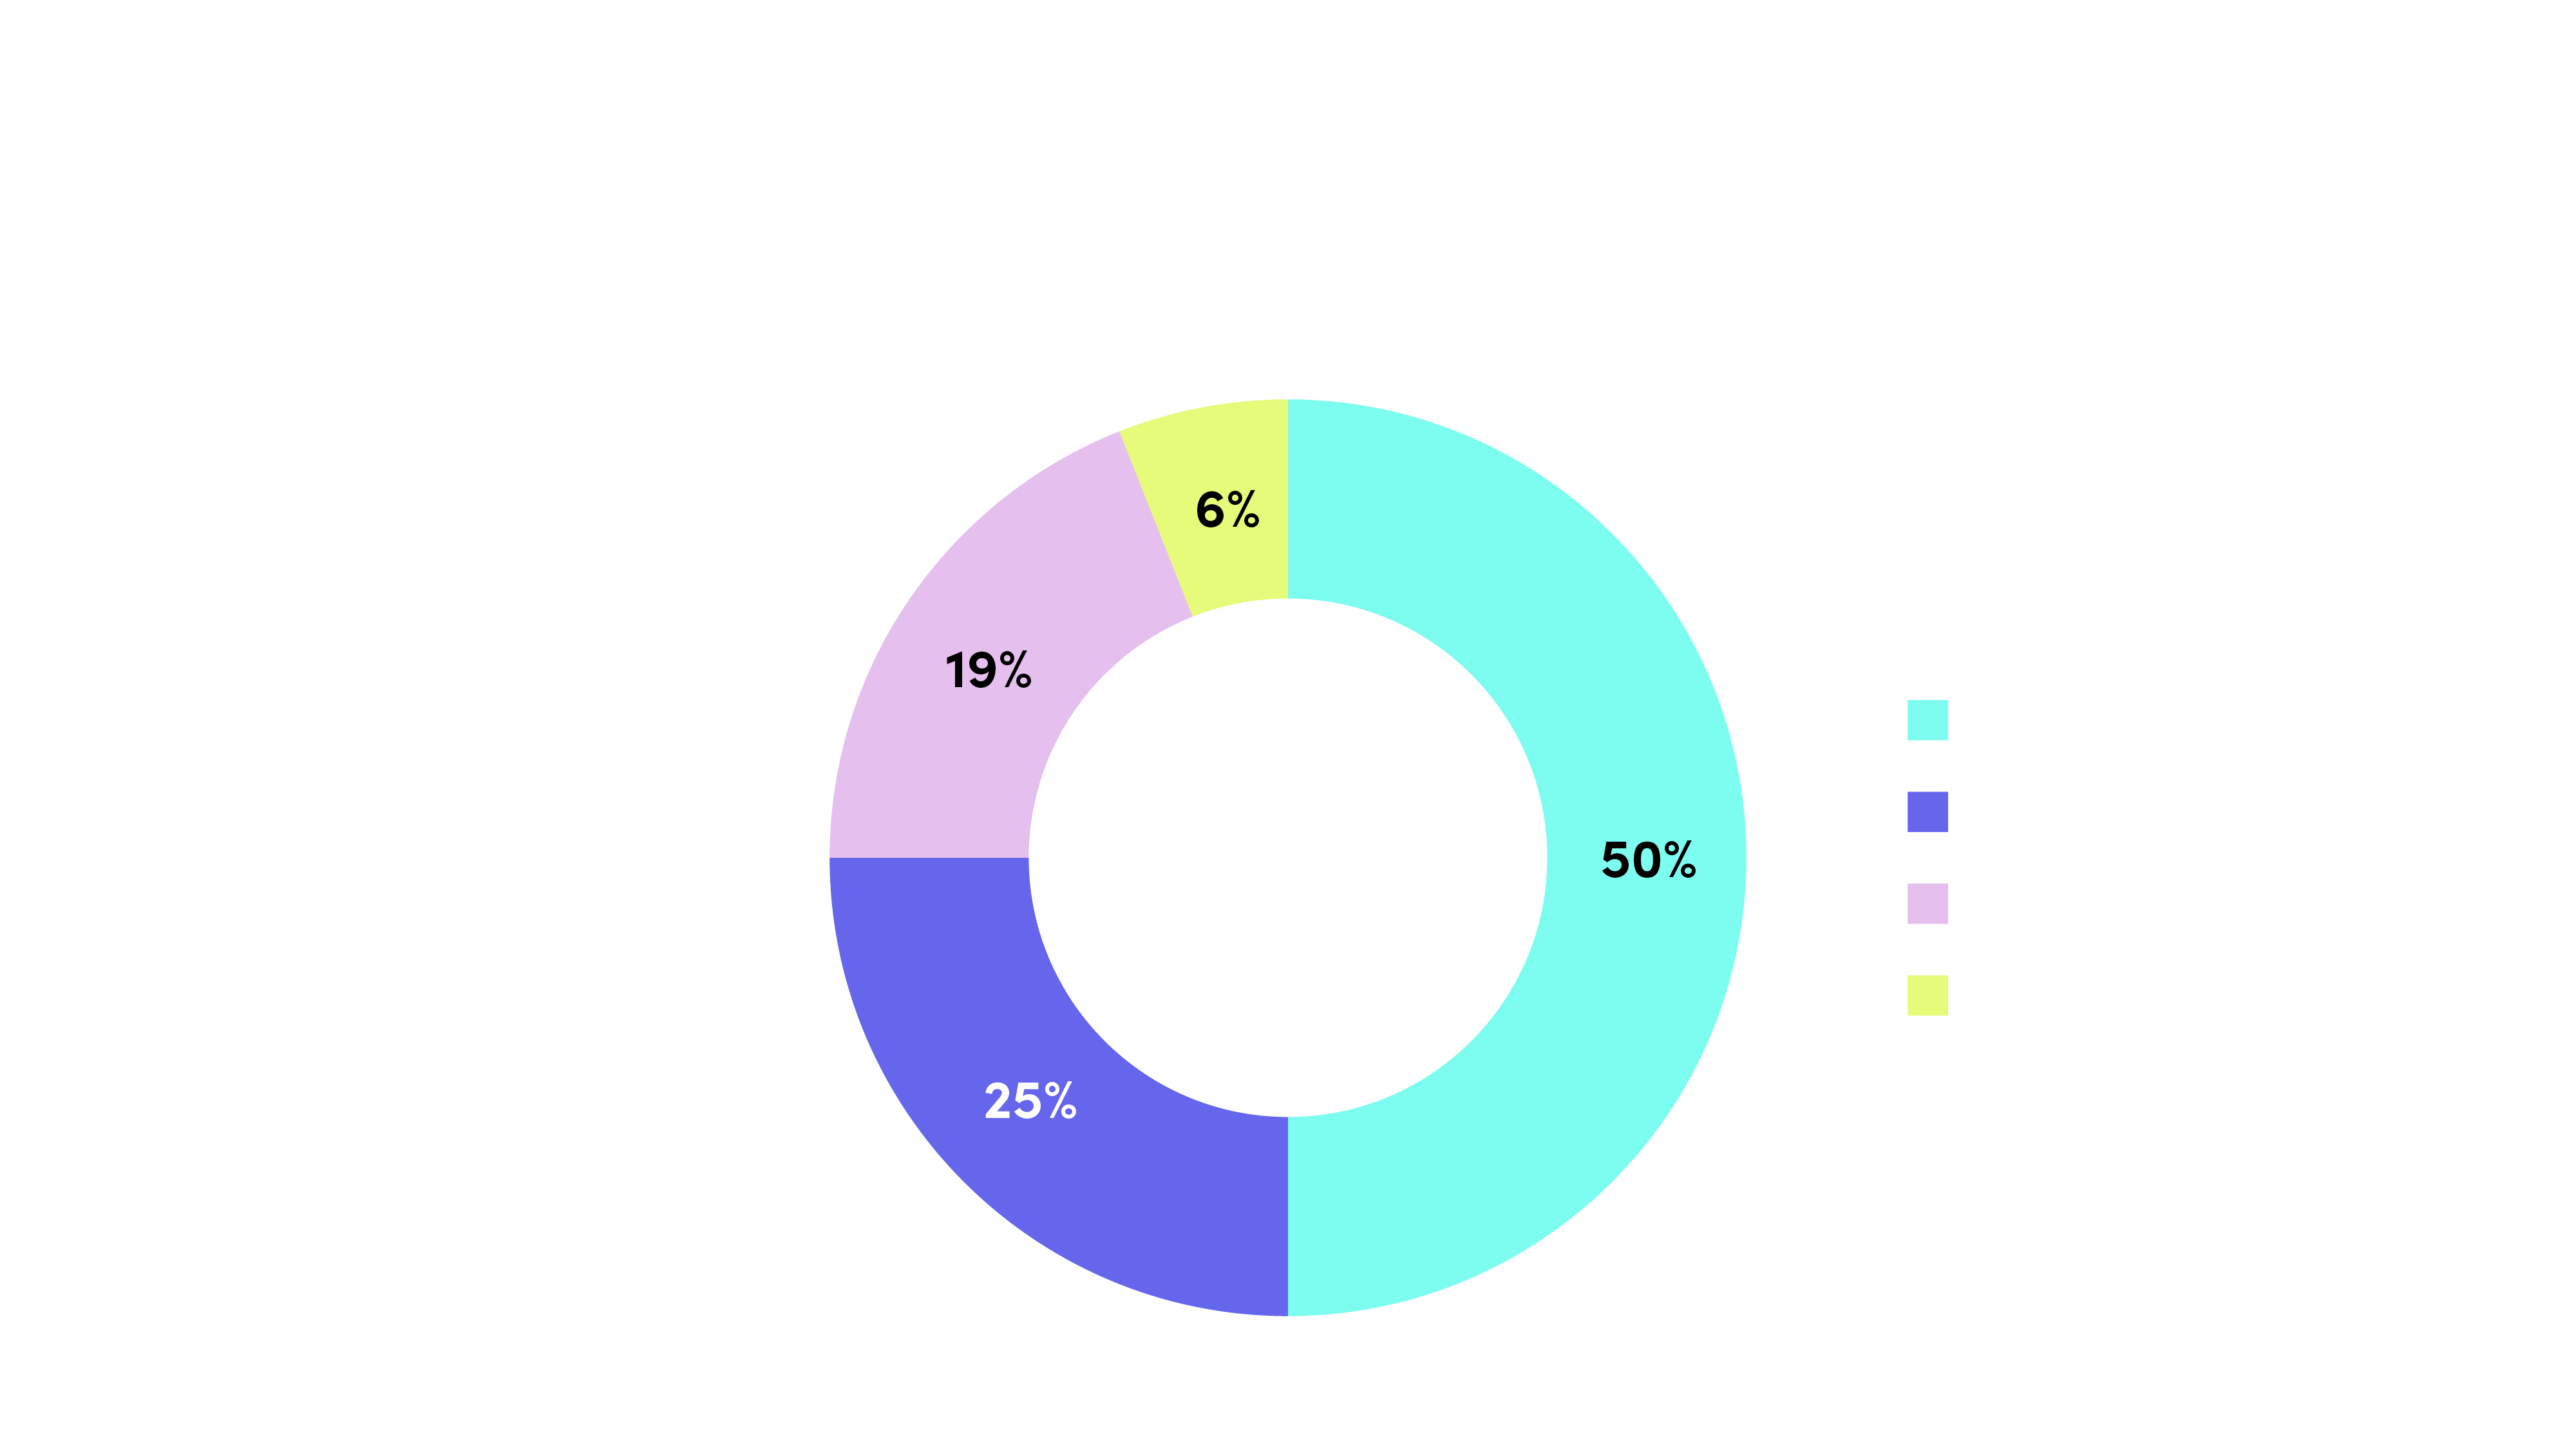 The main components of the atmospheric greenhouse effect